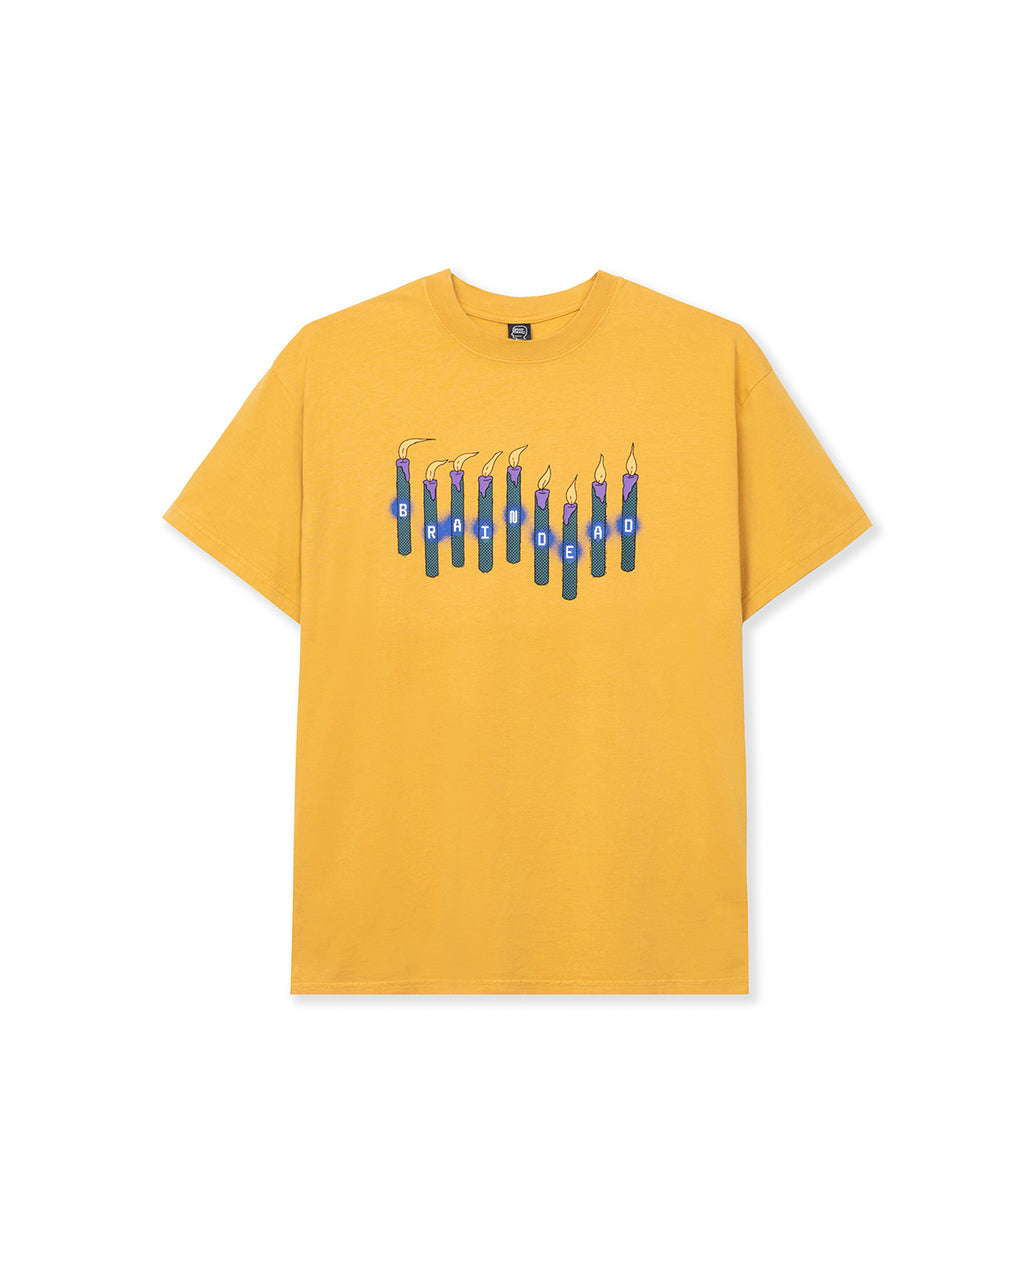 Candles T-Shirt - Yellow